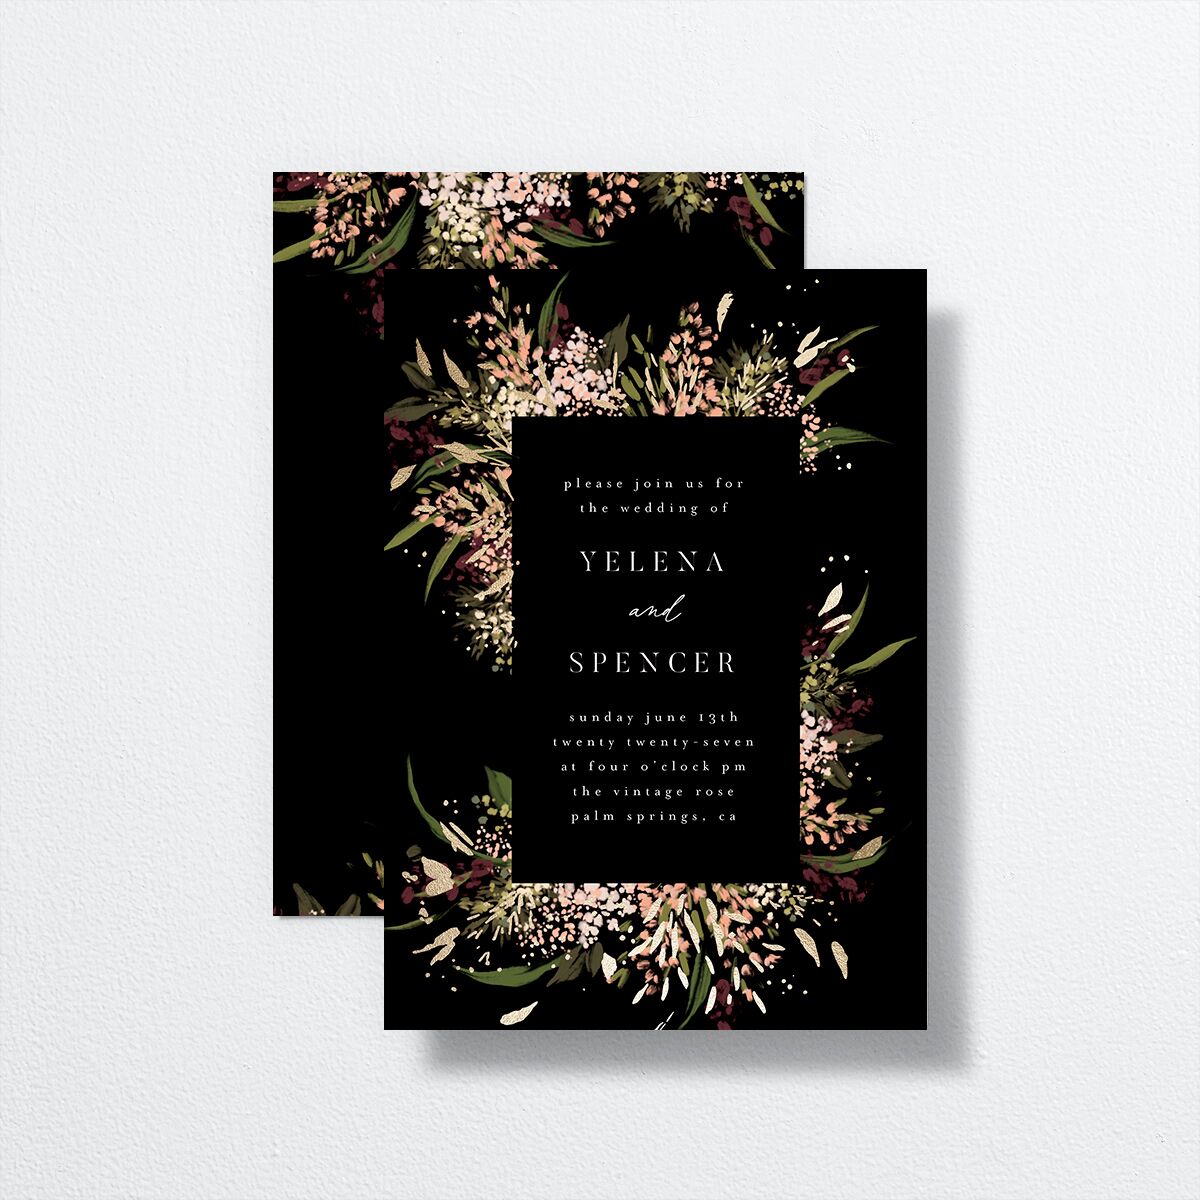 Moody Romance Wedding Invitations front-and-back in black